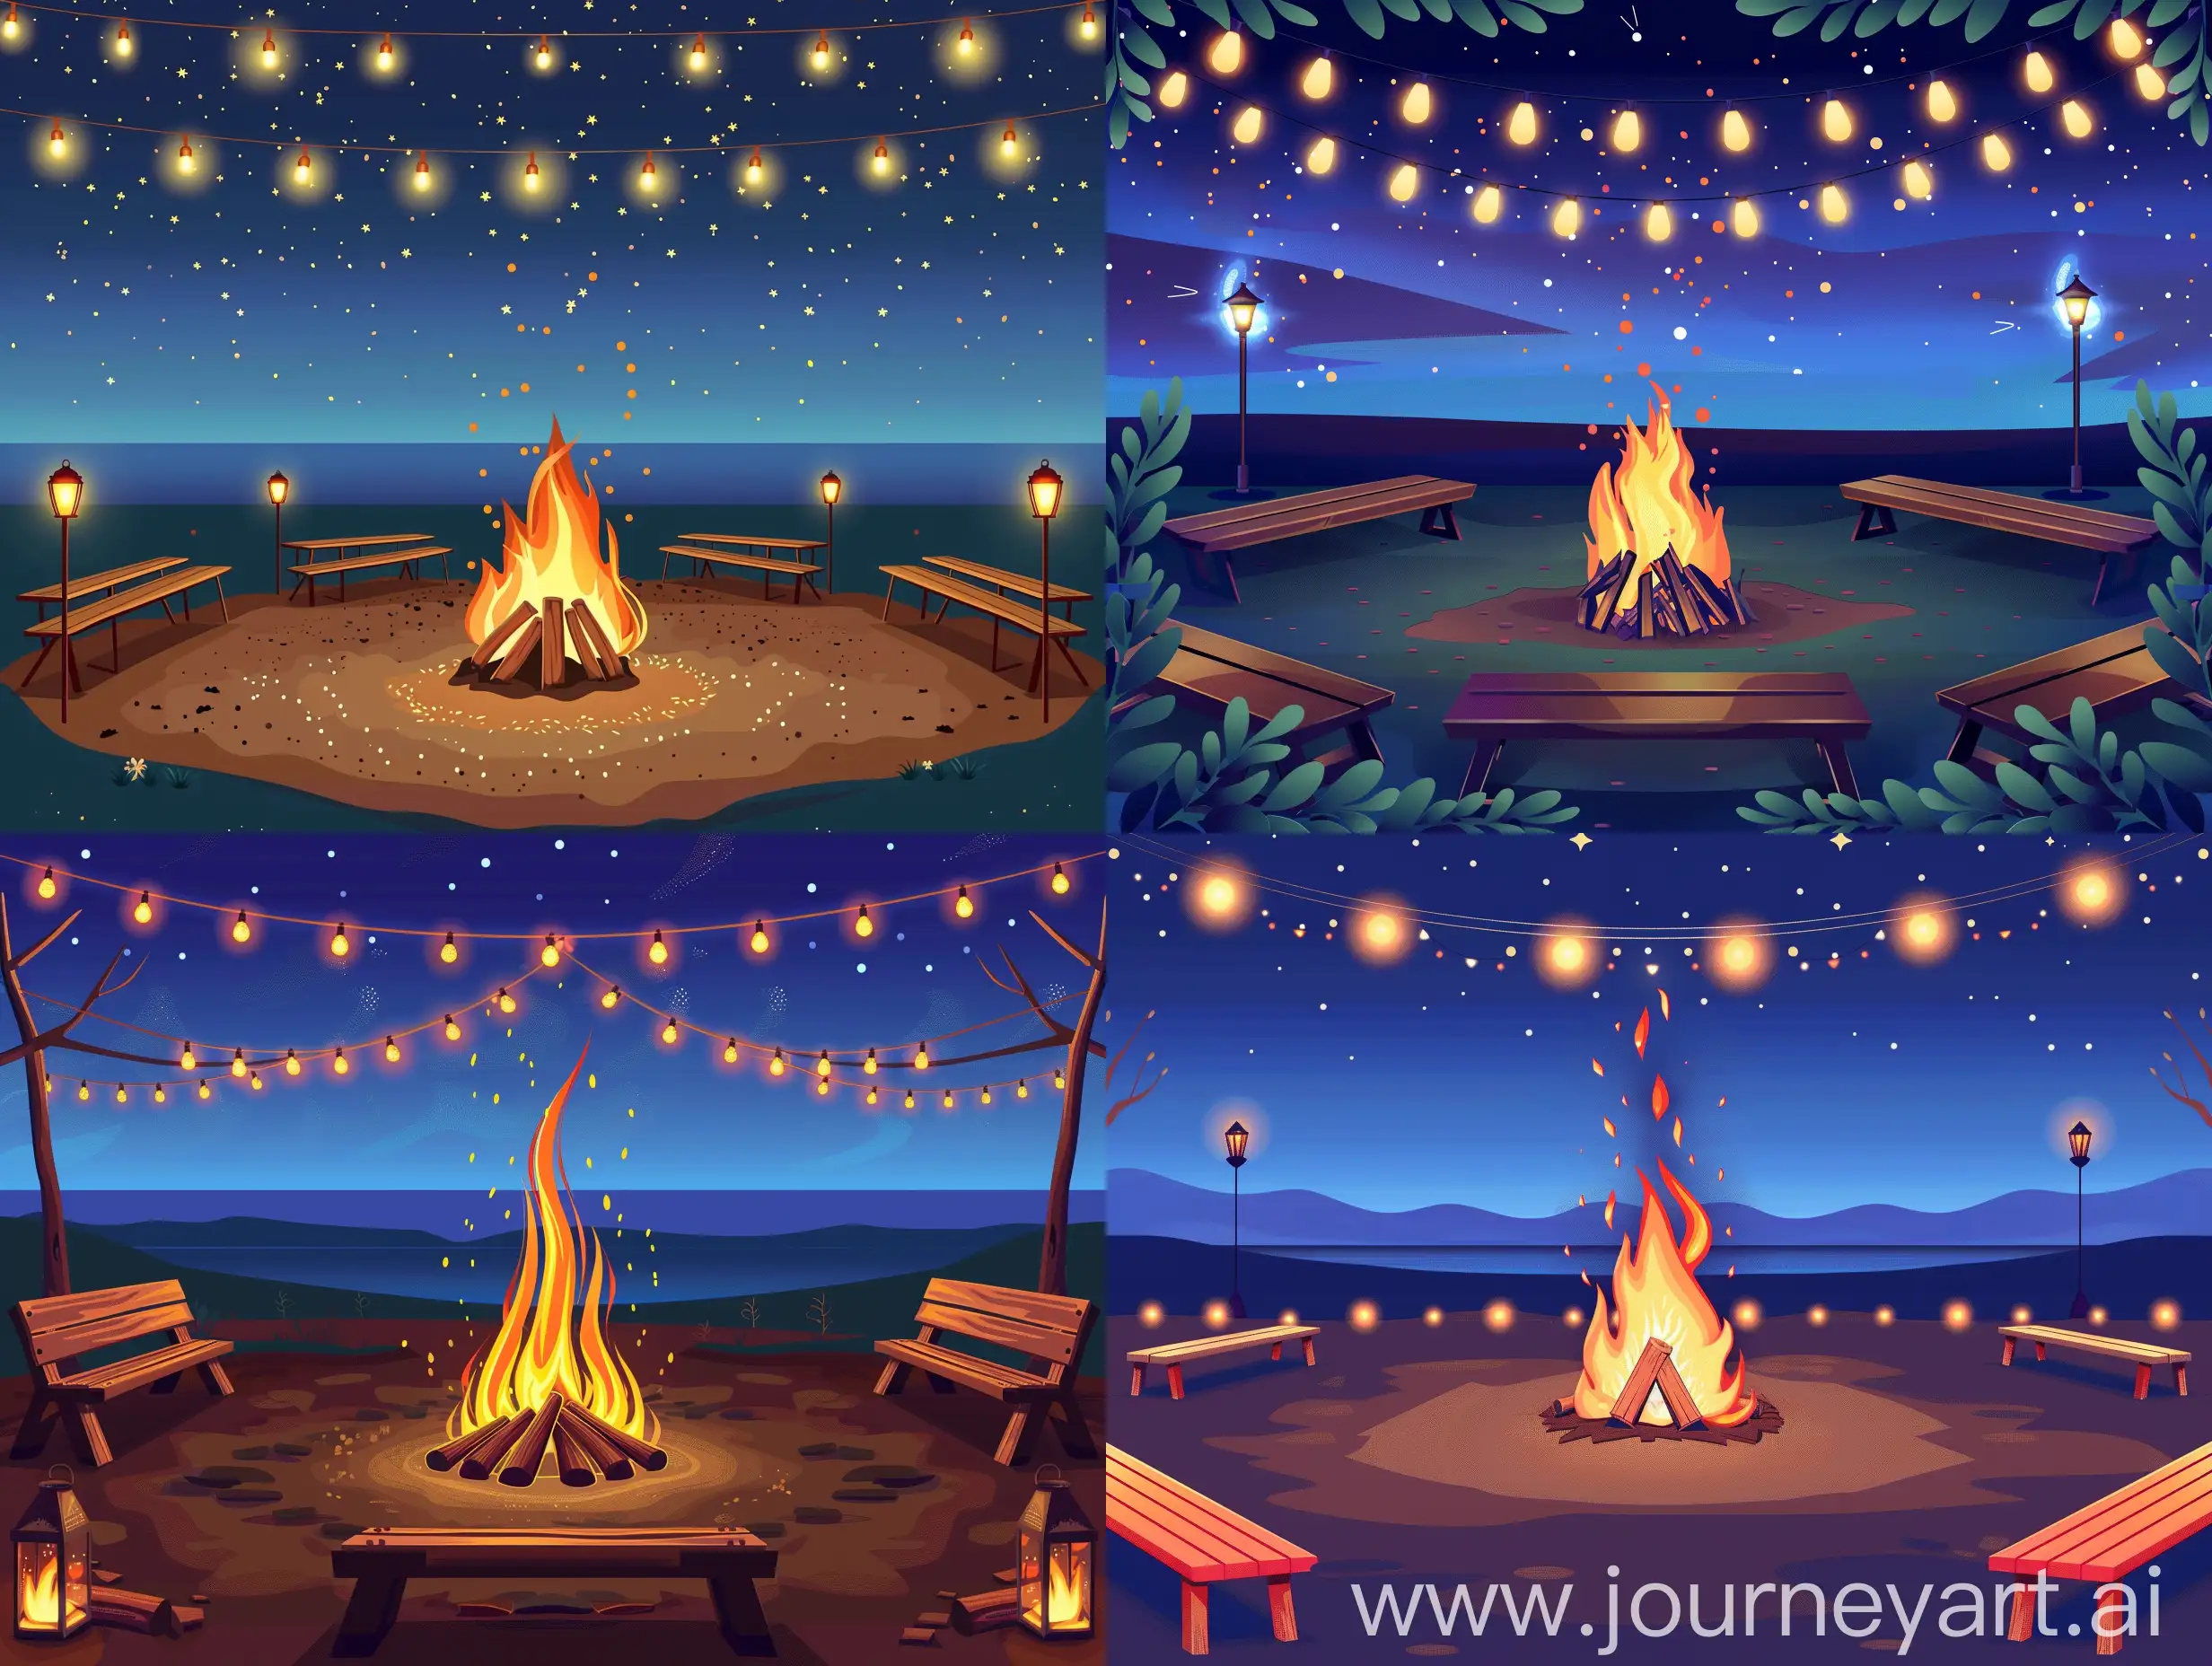 Nighttime-Campfire-Vector-Illustration-on-Arable-Land-with-Benches-and-Decorative-Lights